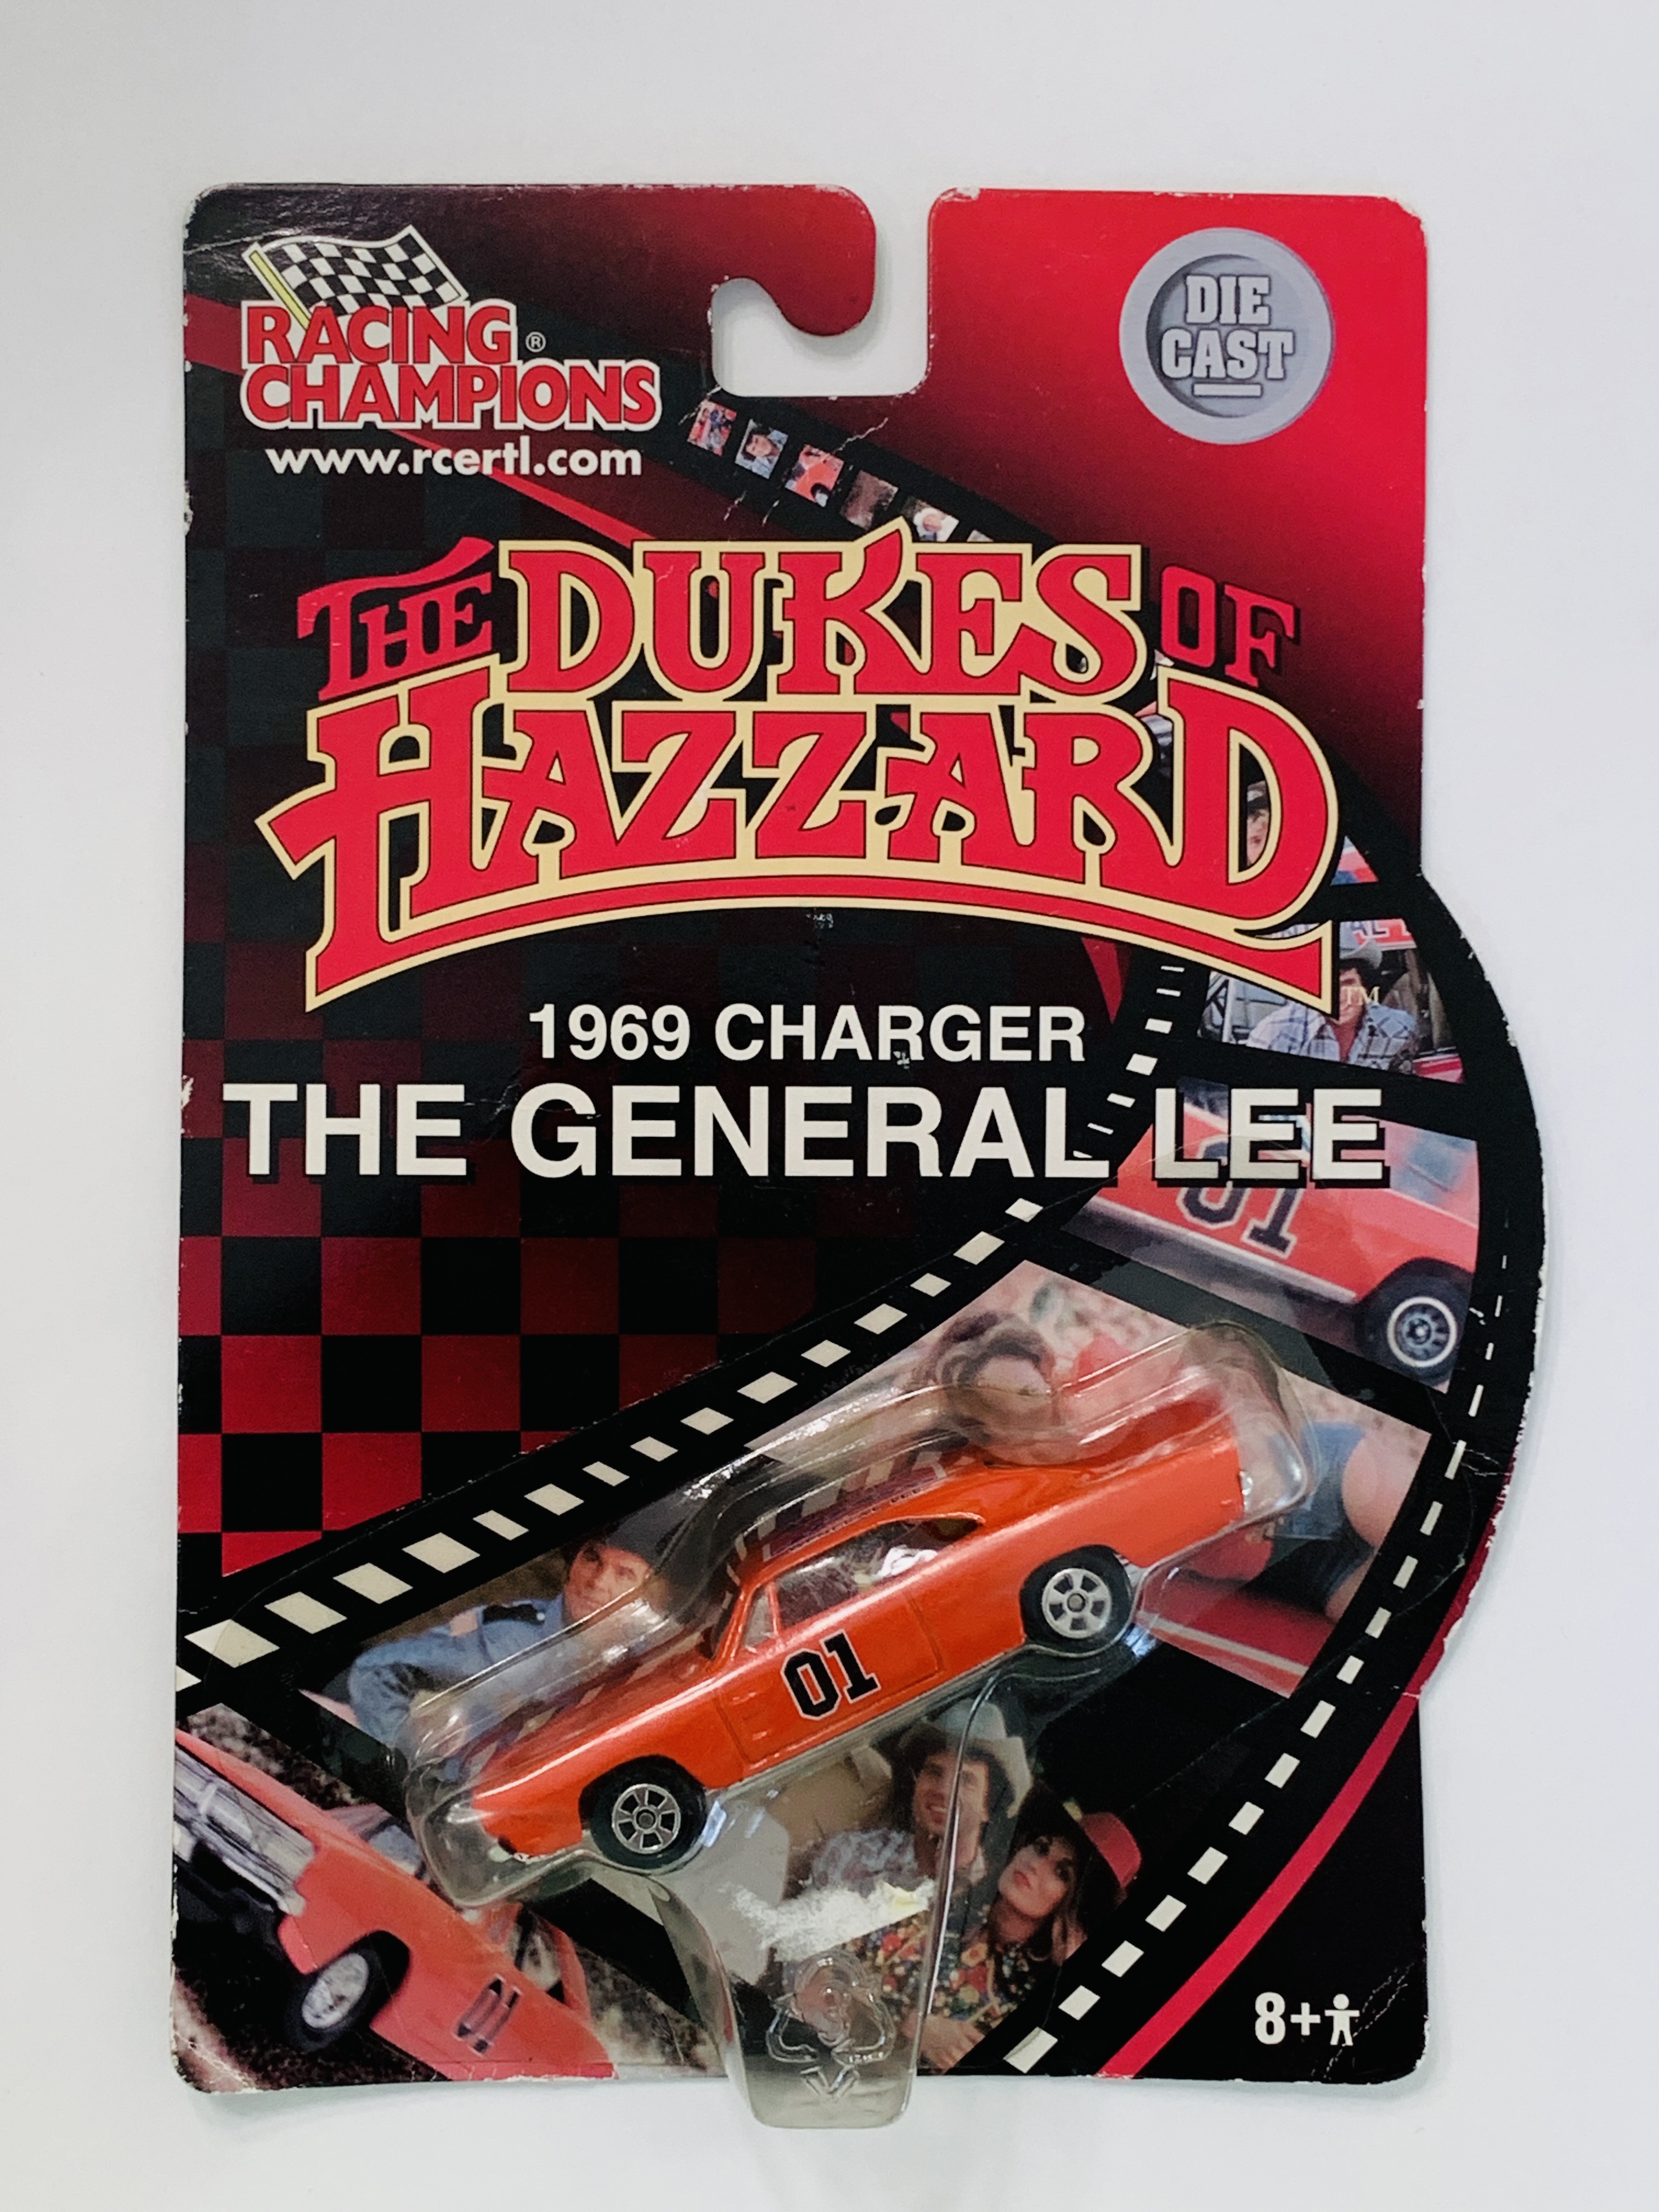 Racing Champions The Dukes Of Hazzard 1969 Charger The General Lee